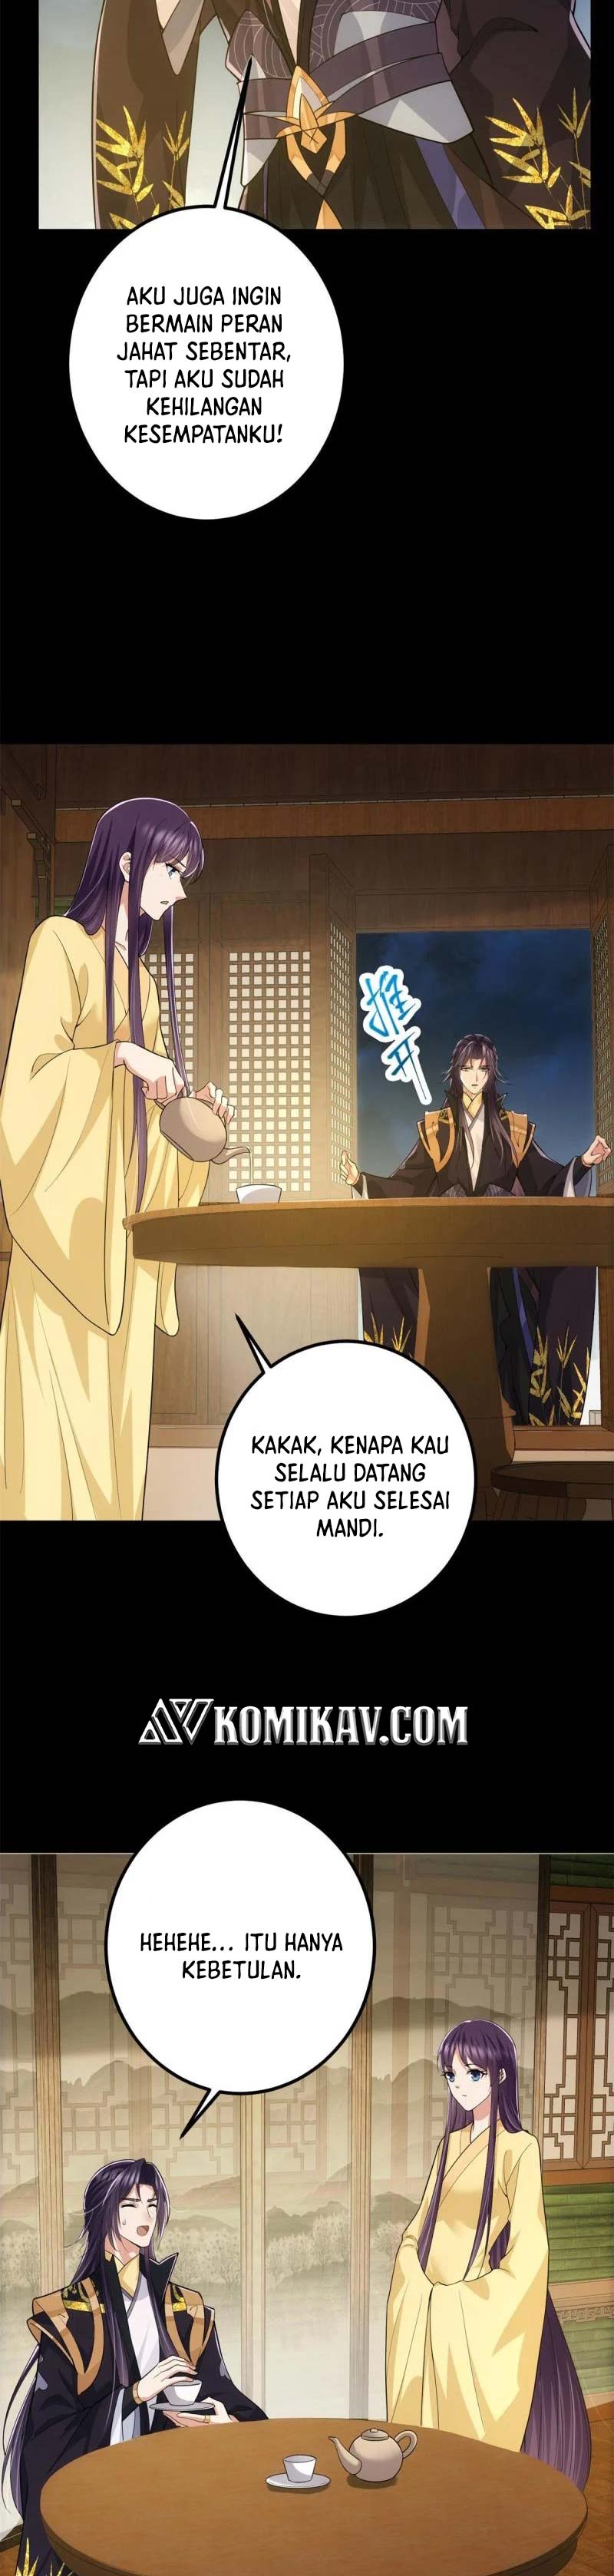 Keep A Low Profile, Sect Leader Chapter 88 Bahasa Indonesia